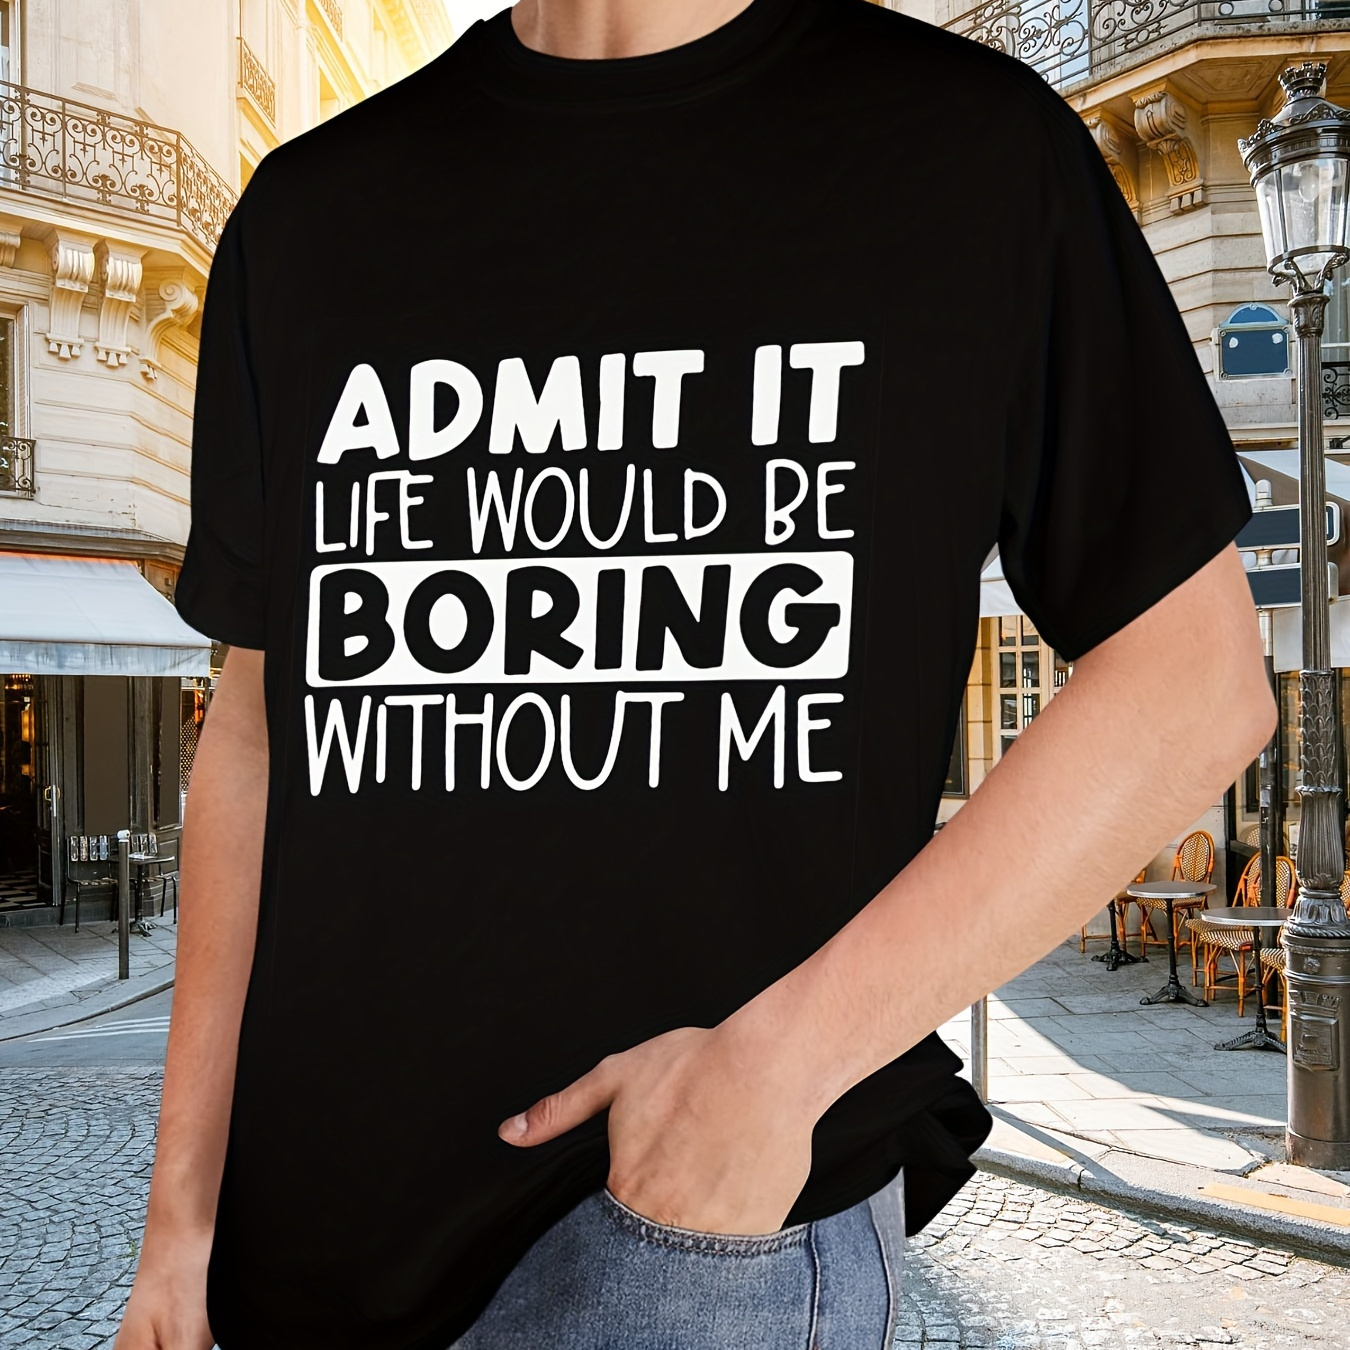 

Admit It... Print Tee Shirt, Tees For Men, Casual Short Sleeve T-shirt For Summer